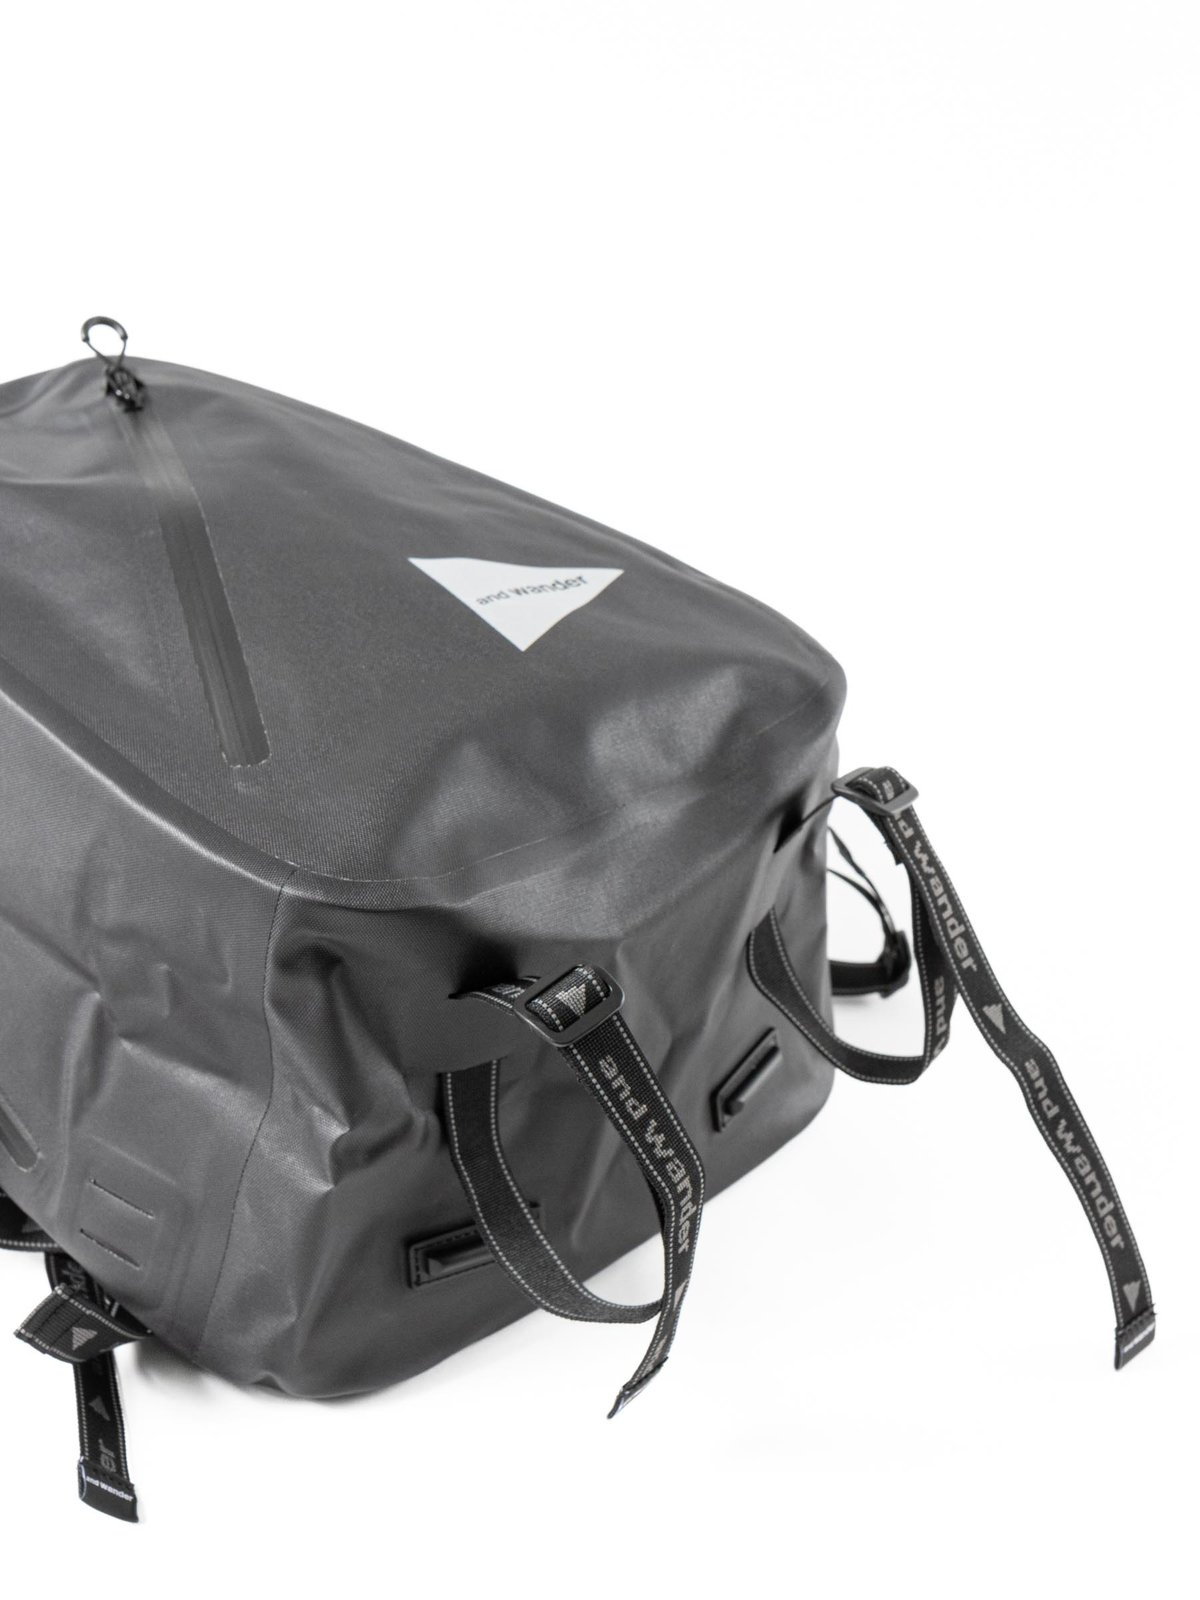 WATERPROOF DAY PACK BLACK by and wander – The Bureau Belfast - The 